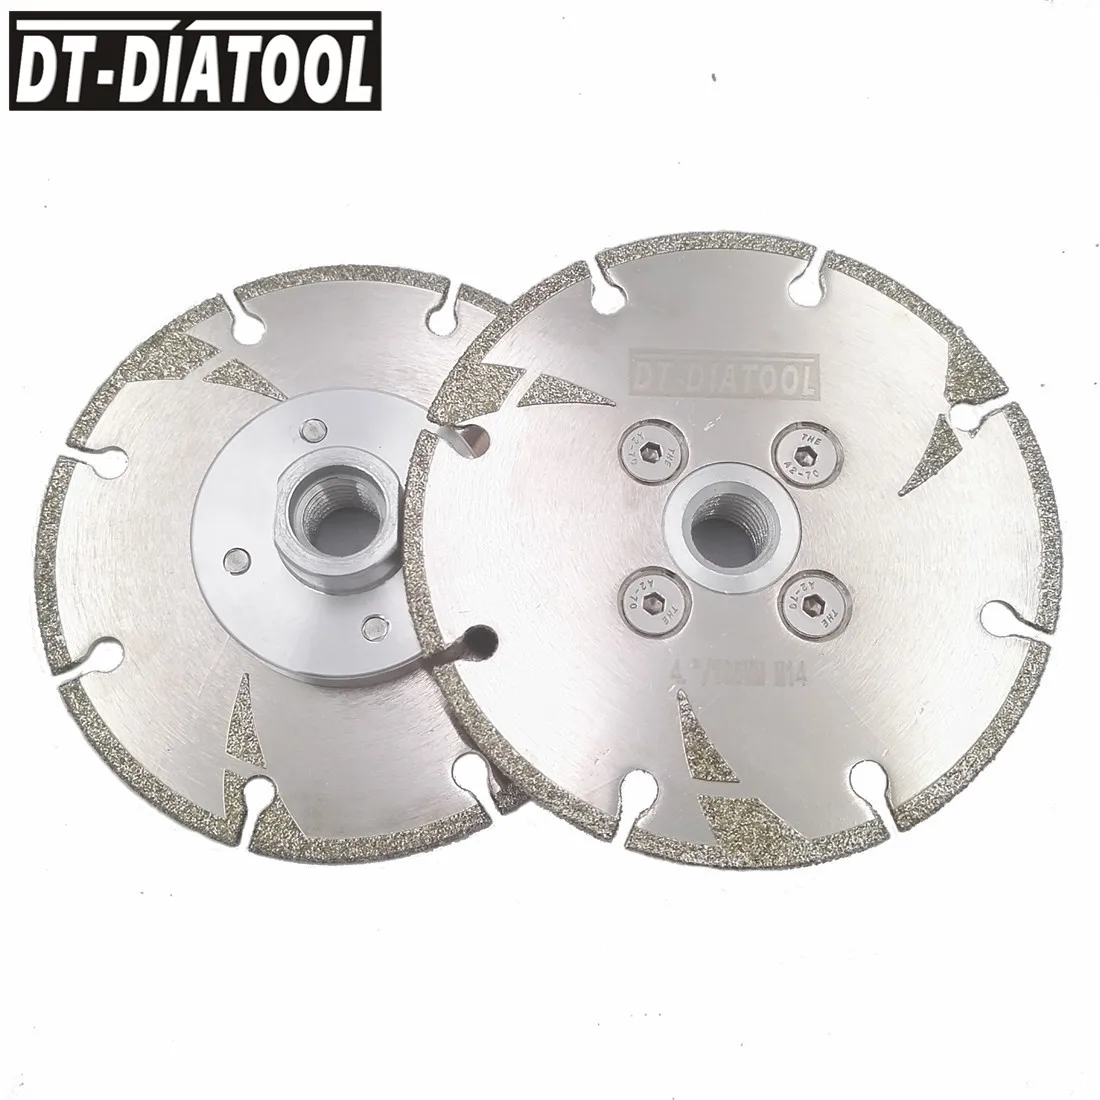 

DT-DIATOOL 2pcs M14 Thread 4 Inch/105mm Electroplated Diamond Saw Blade Both Side Ox-horn Coated Marble Granite Cutting Disc